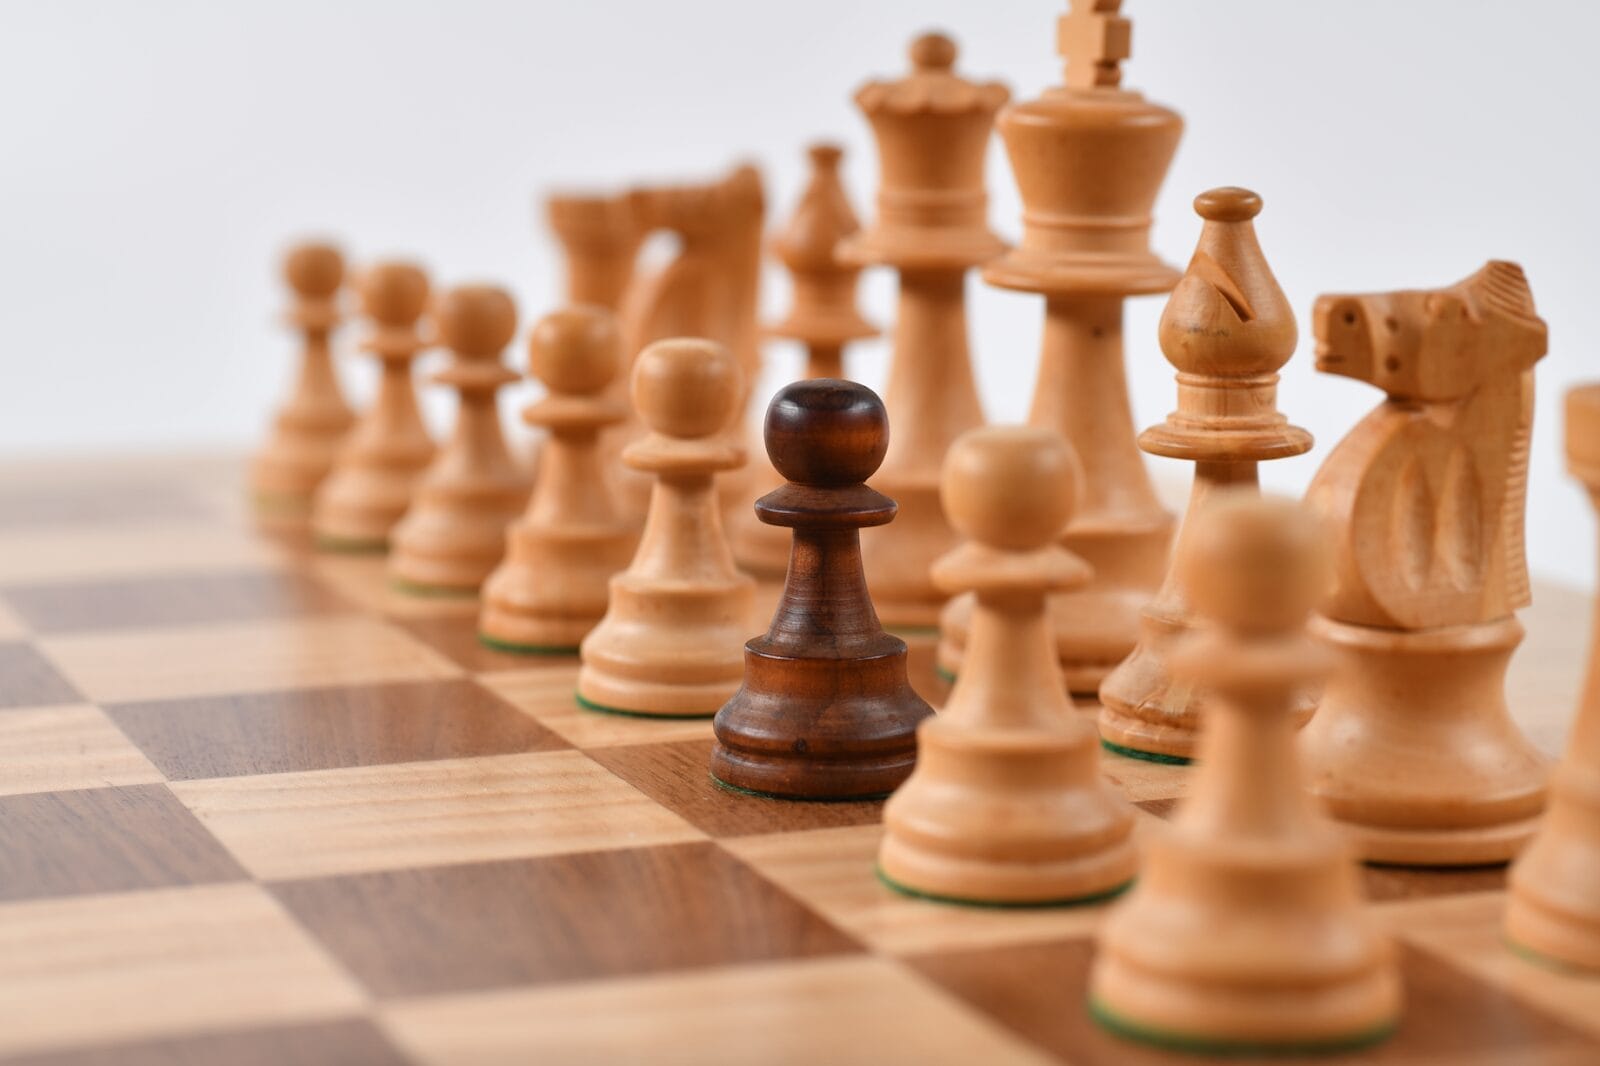 Should a beginner in chess practice tactics and openings, or just play the  game and develop some strategies on my own? - Quora